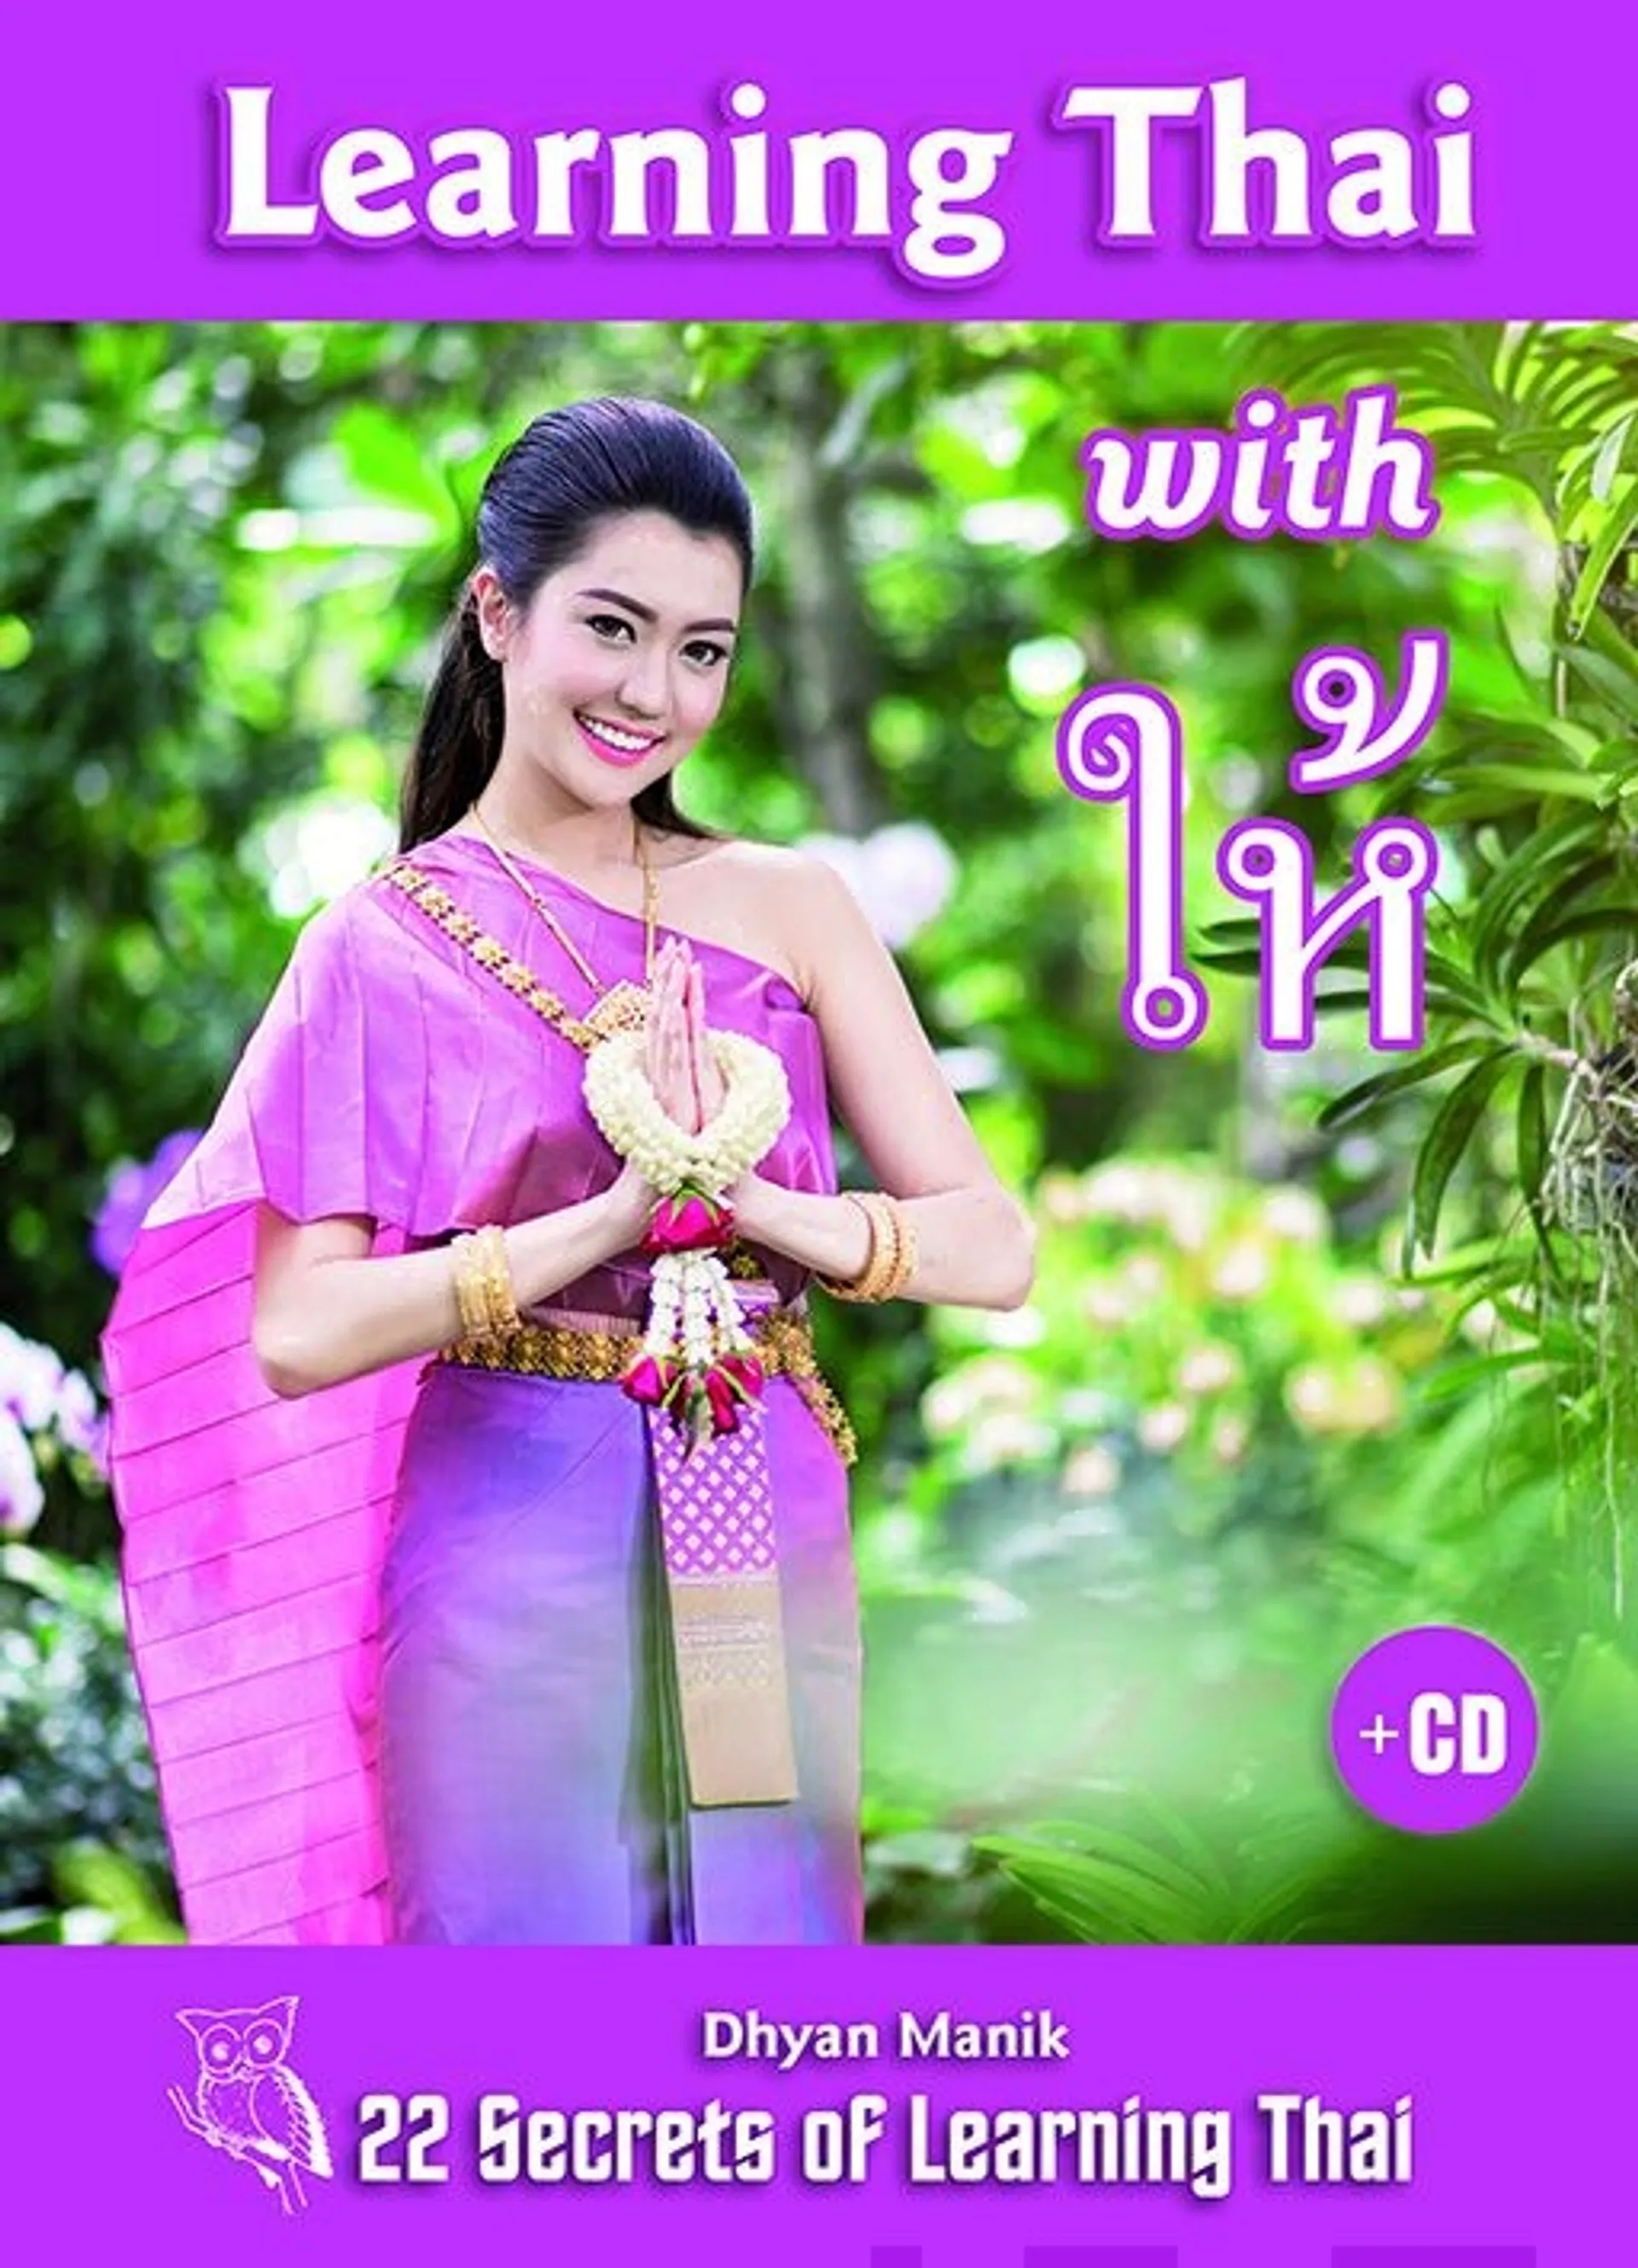 Dhyan, Learning Thai with hâi (+cd)